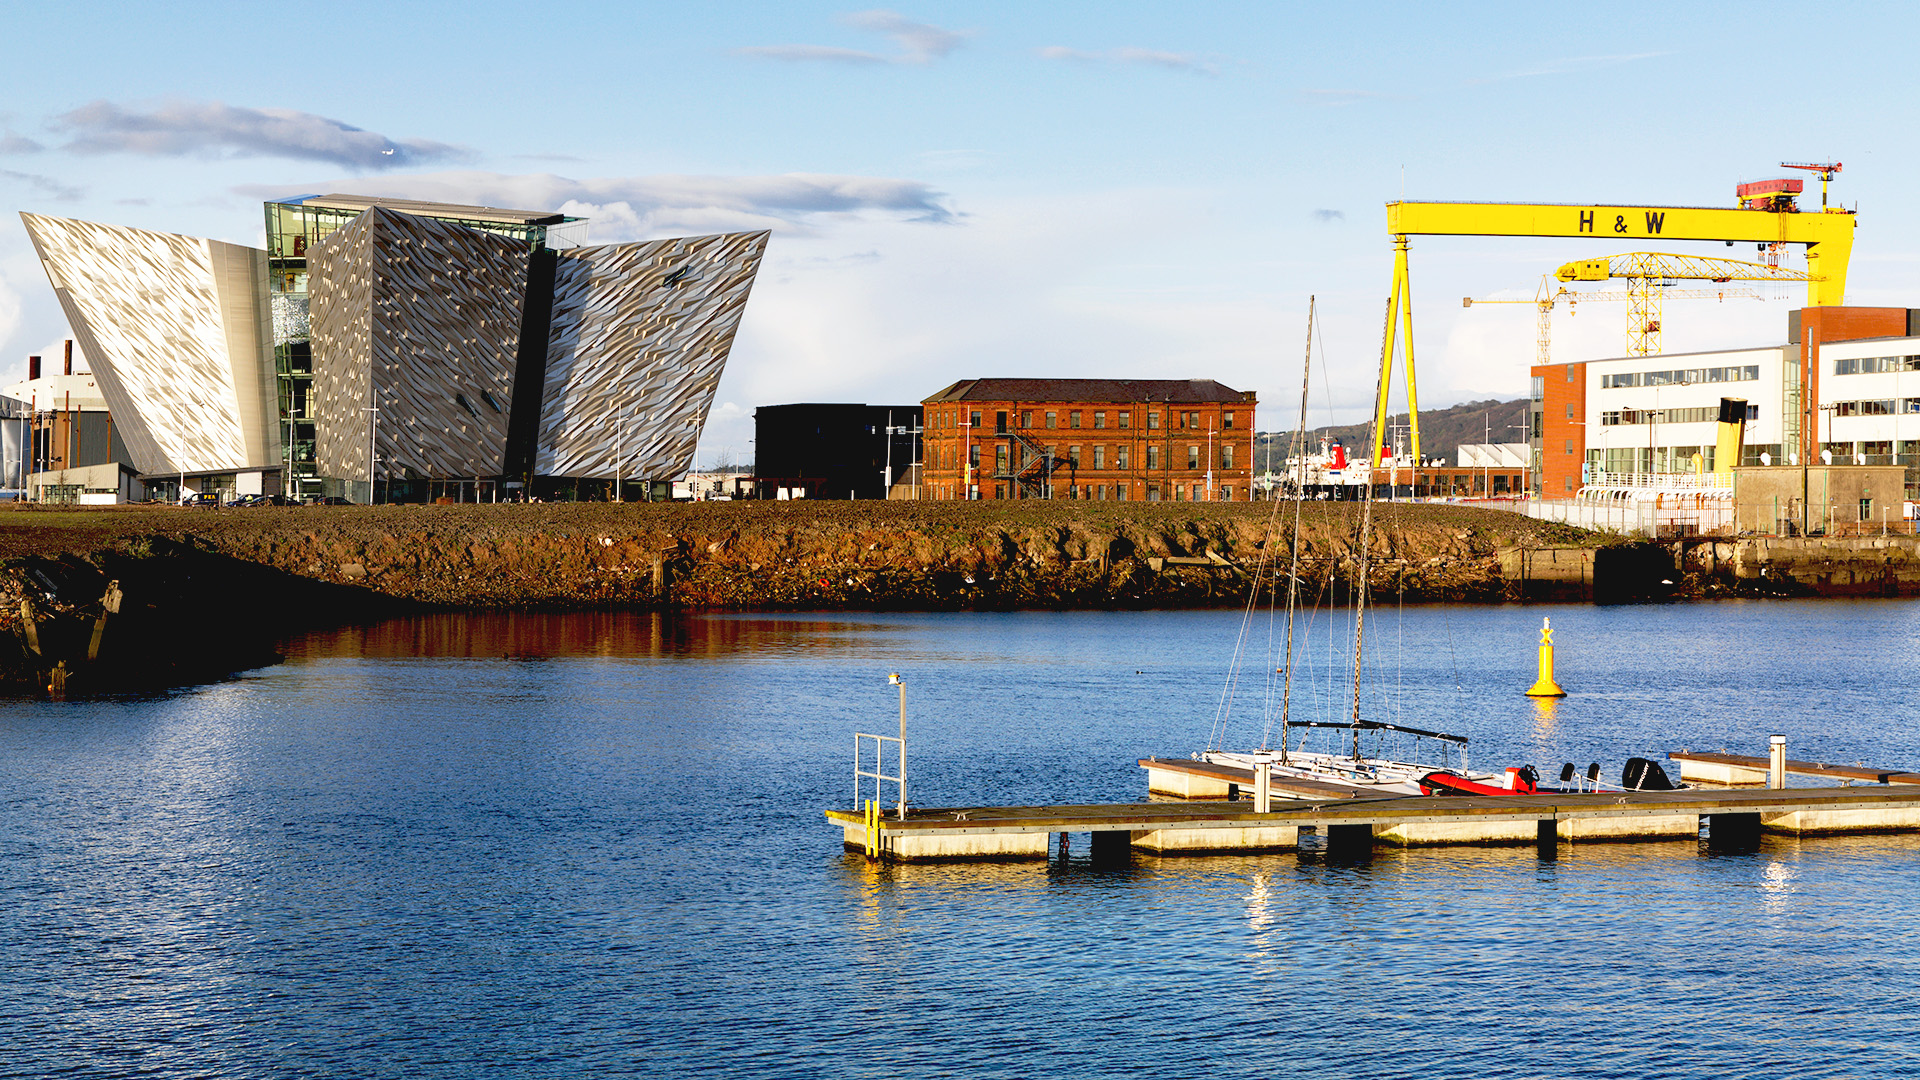 Titanic museum and yellow cranes alongside waterfront